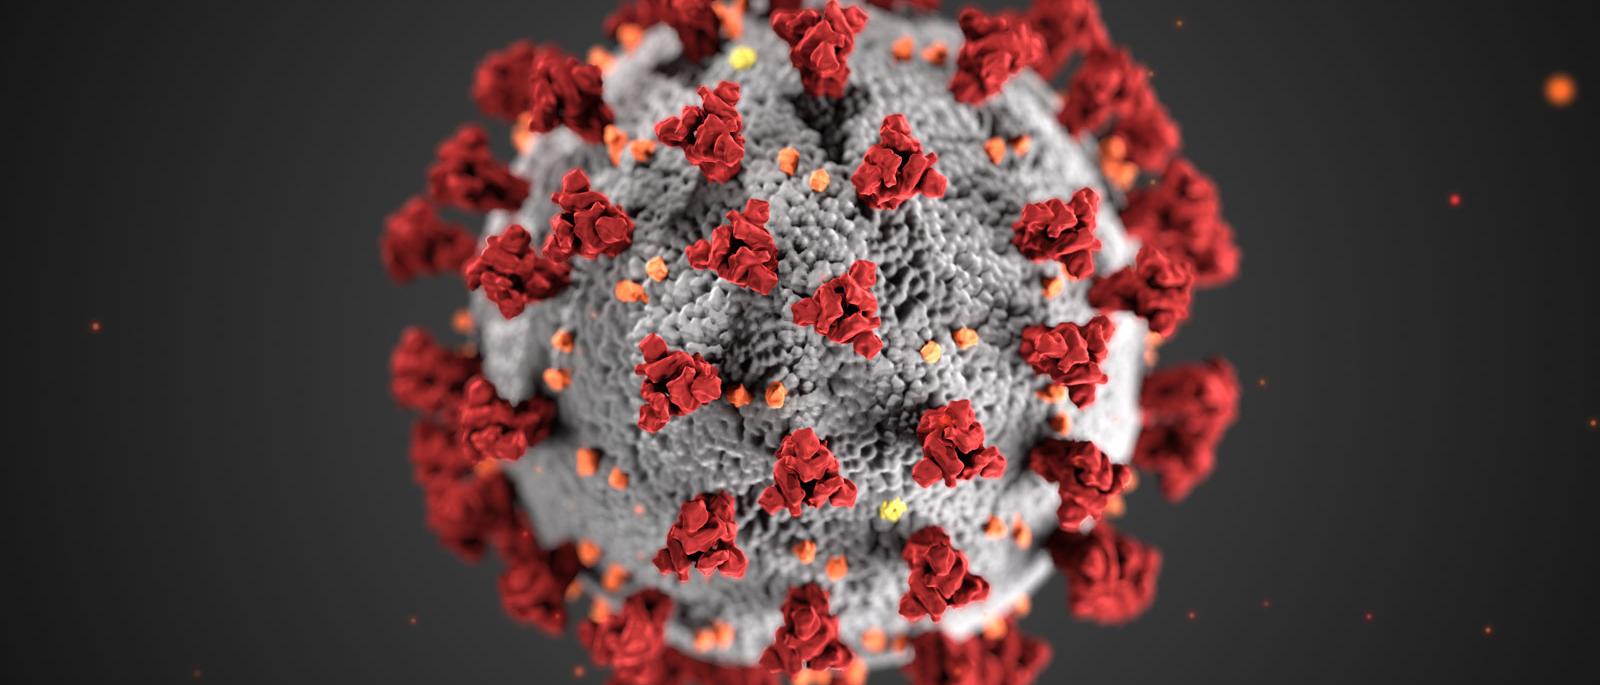 A picture of the COVID-19 virus